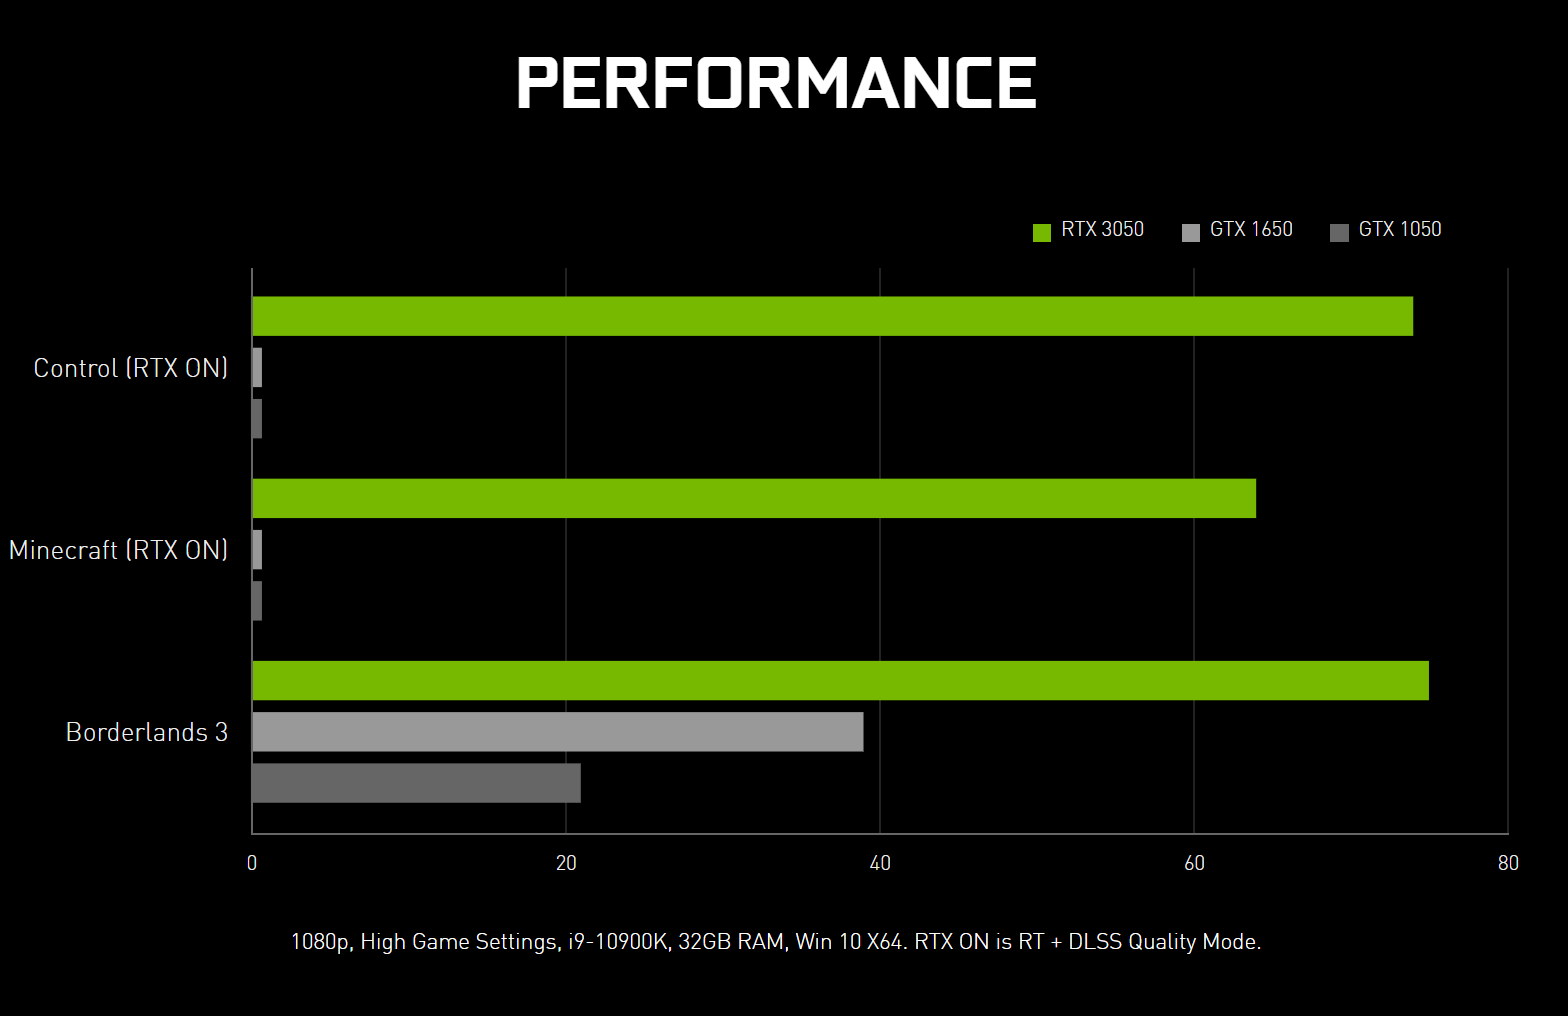 NVIDIA happily confirms RTX 3050 is faster with raytracing on than GPUs without raytracing support - VideoCardz.com